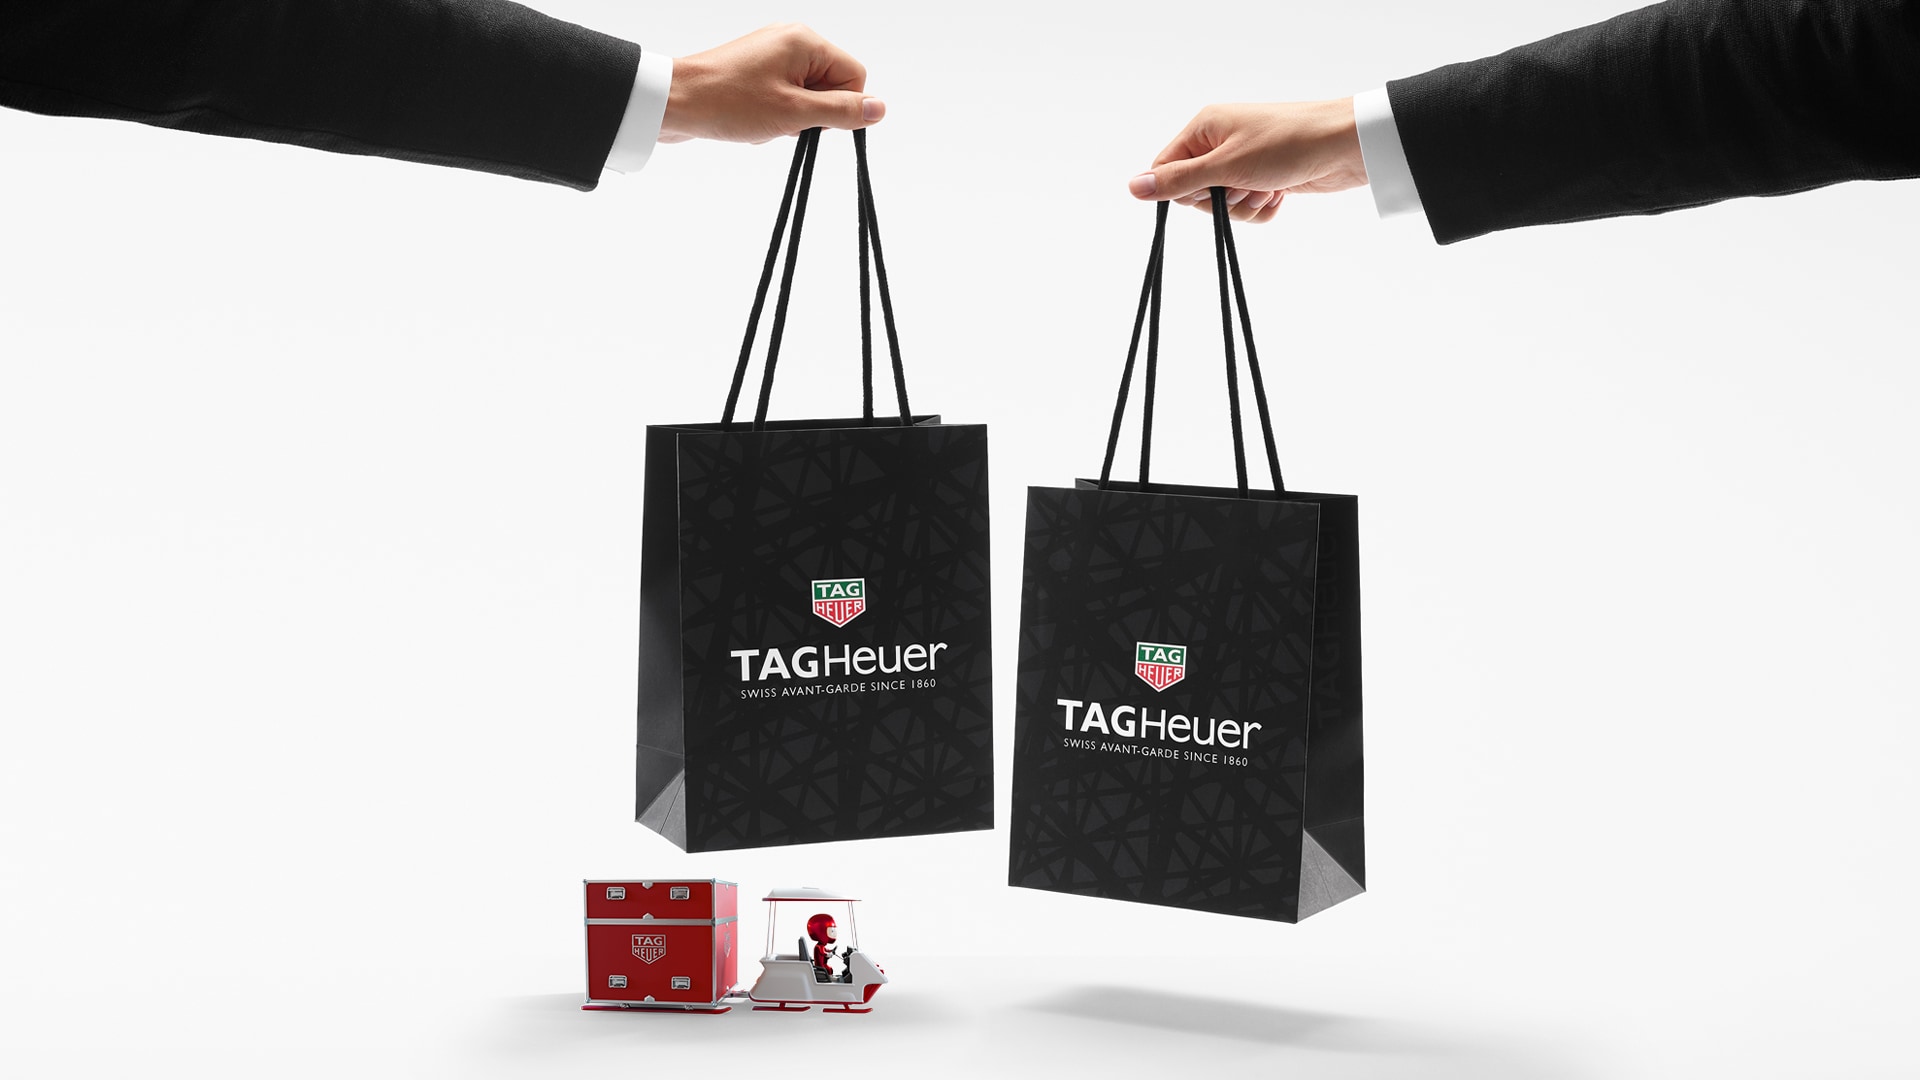 TAG Heuer Logo and sign, new logo meaning and history, PNG, SVG